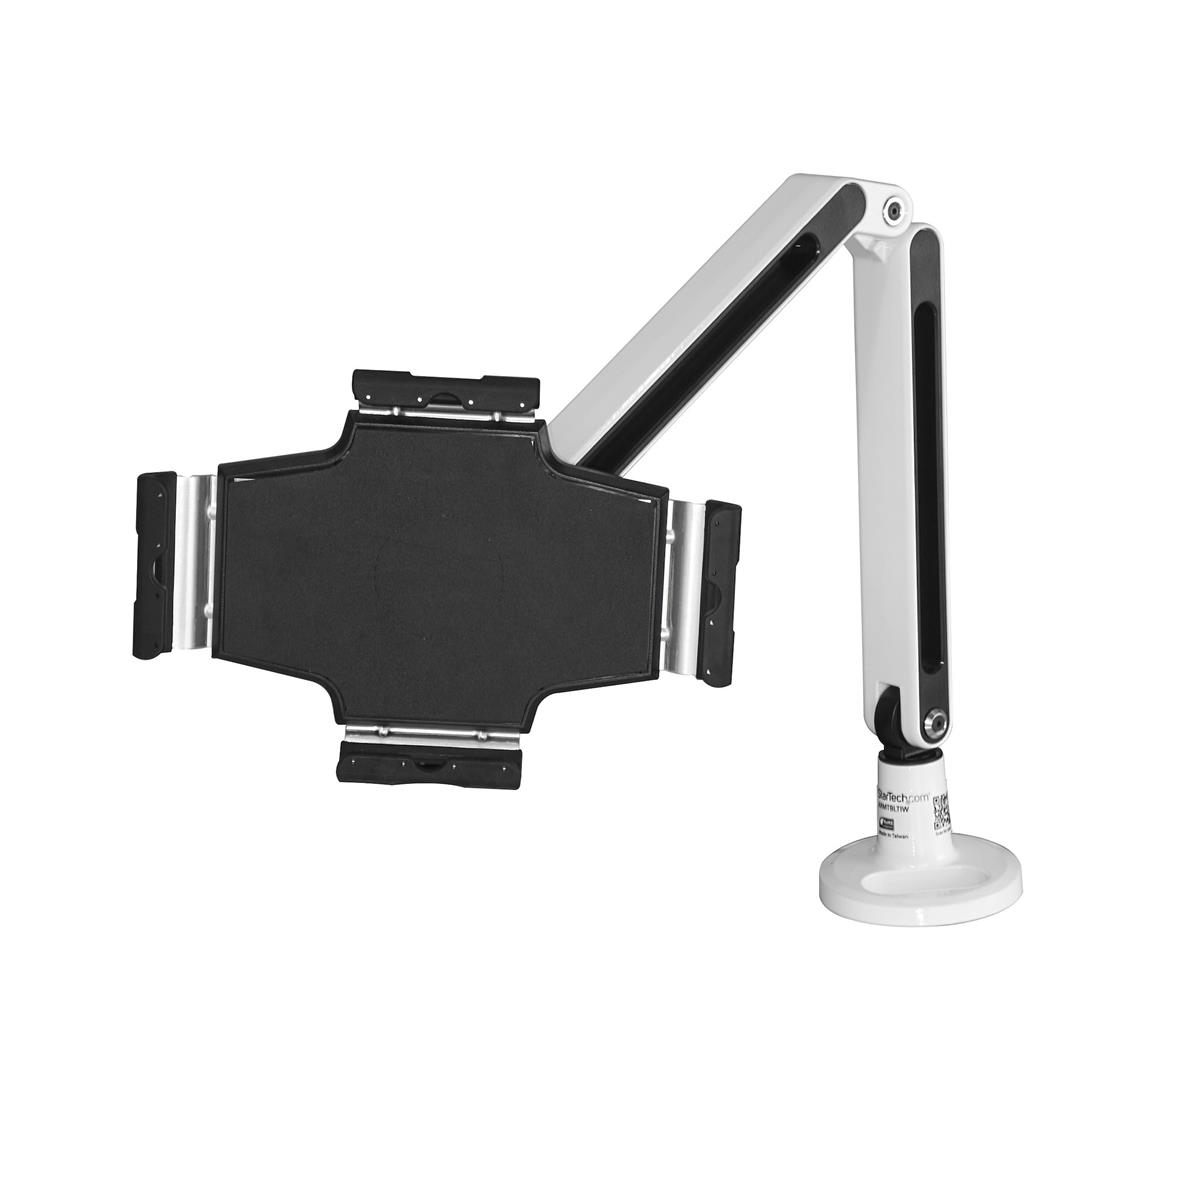 Image of StarTech Desk-Mountable Tablet Stand with Articulating Arm for iPad or Android